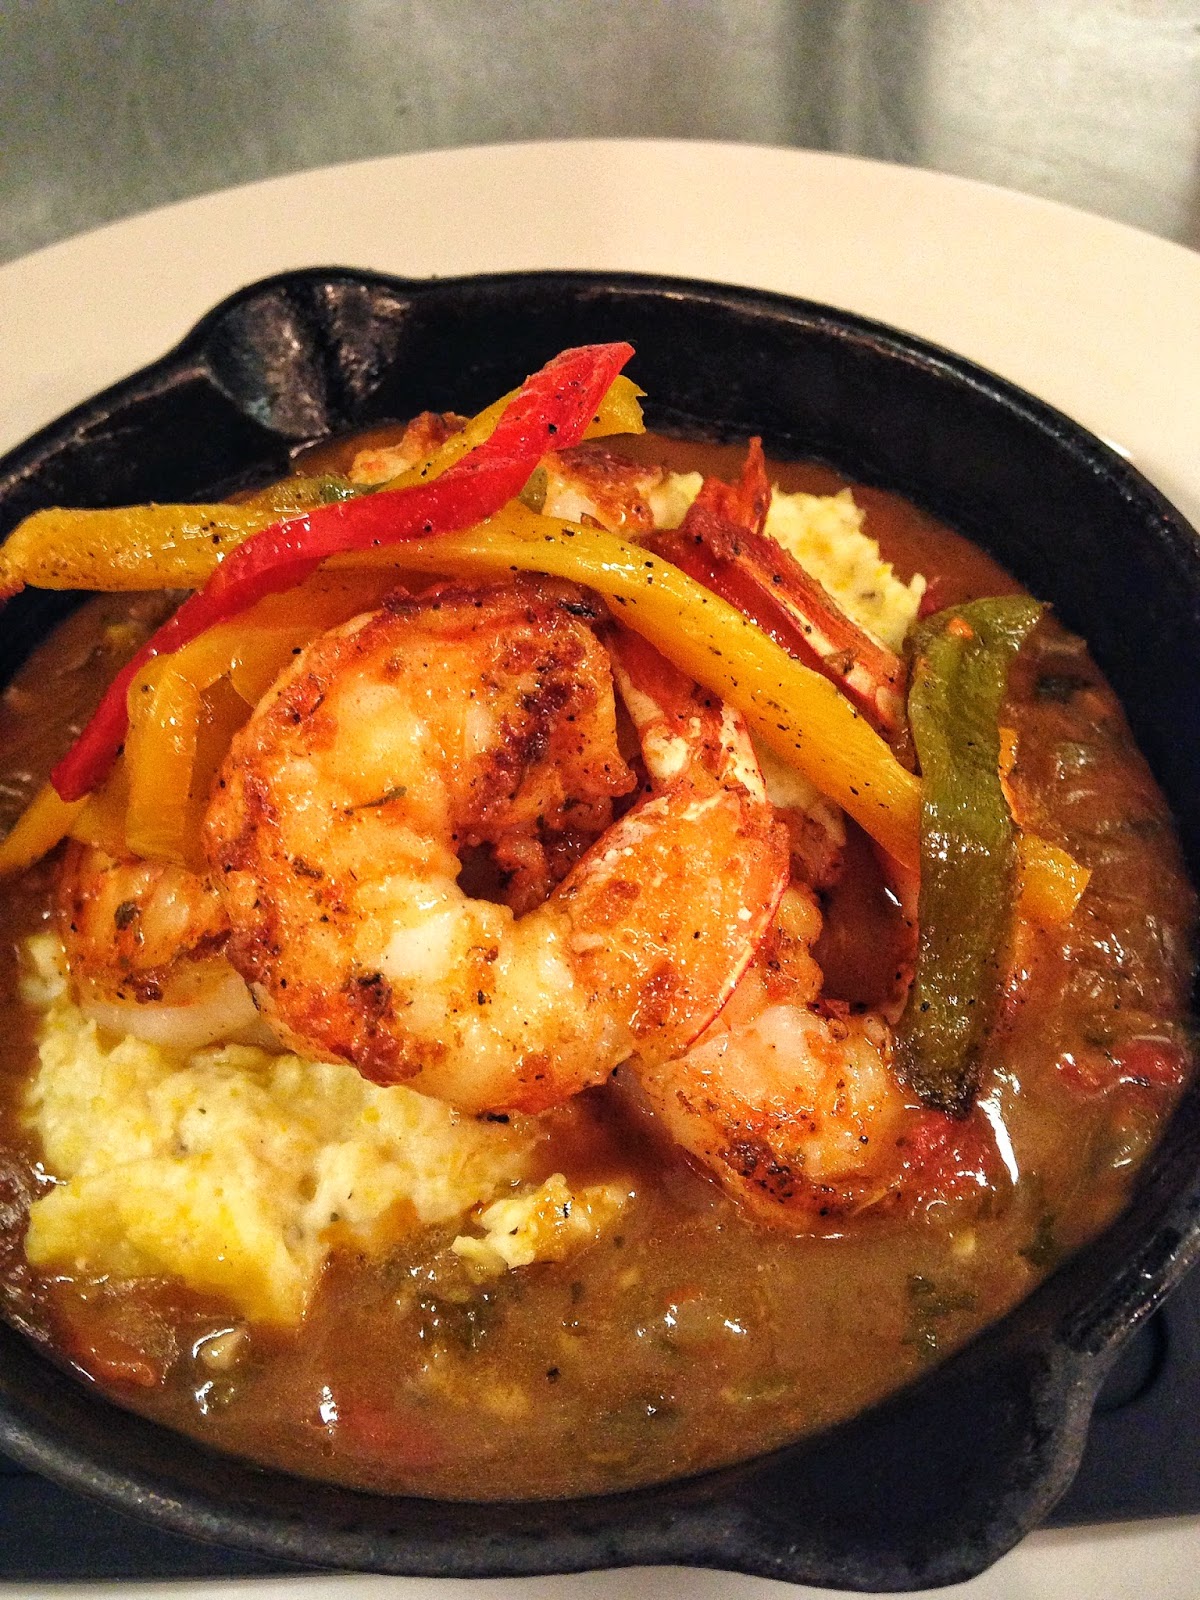 Le Creole's Shrimp and Grits